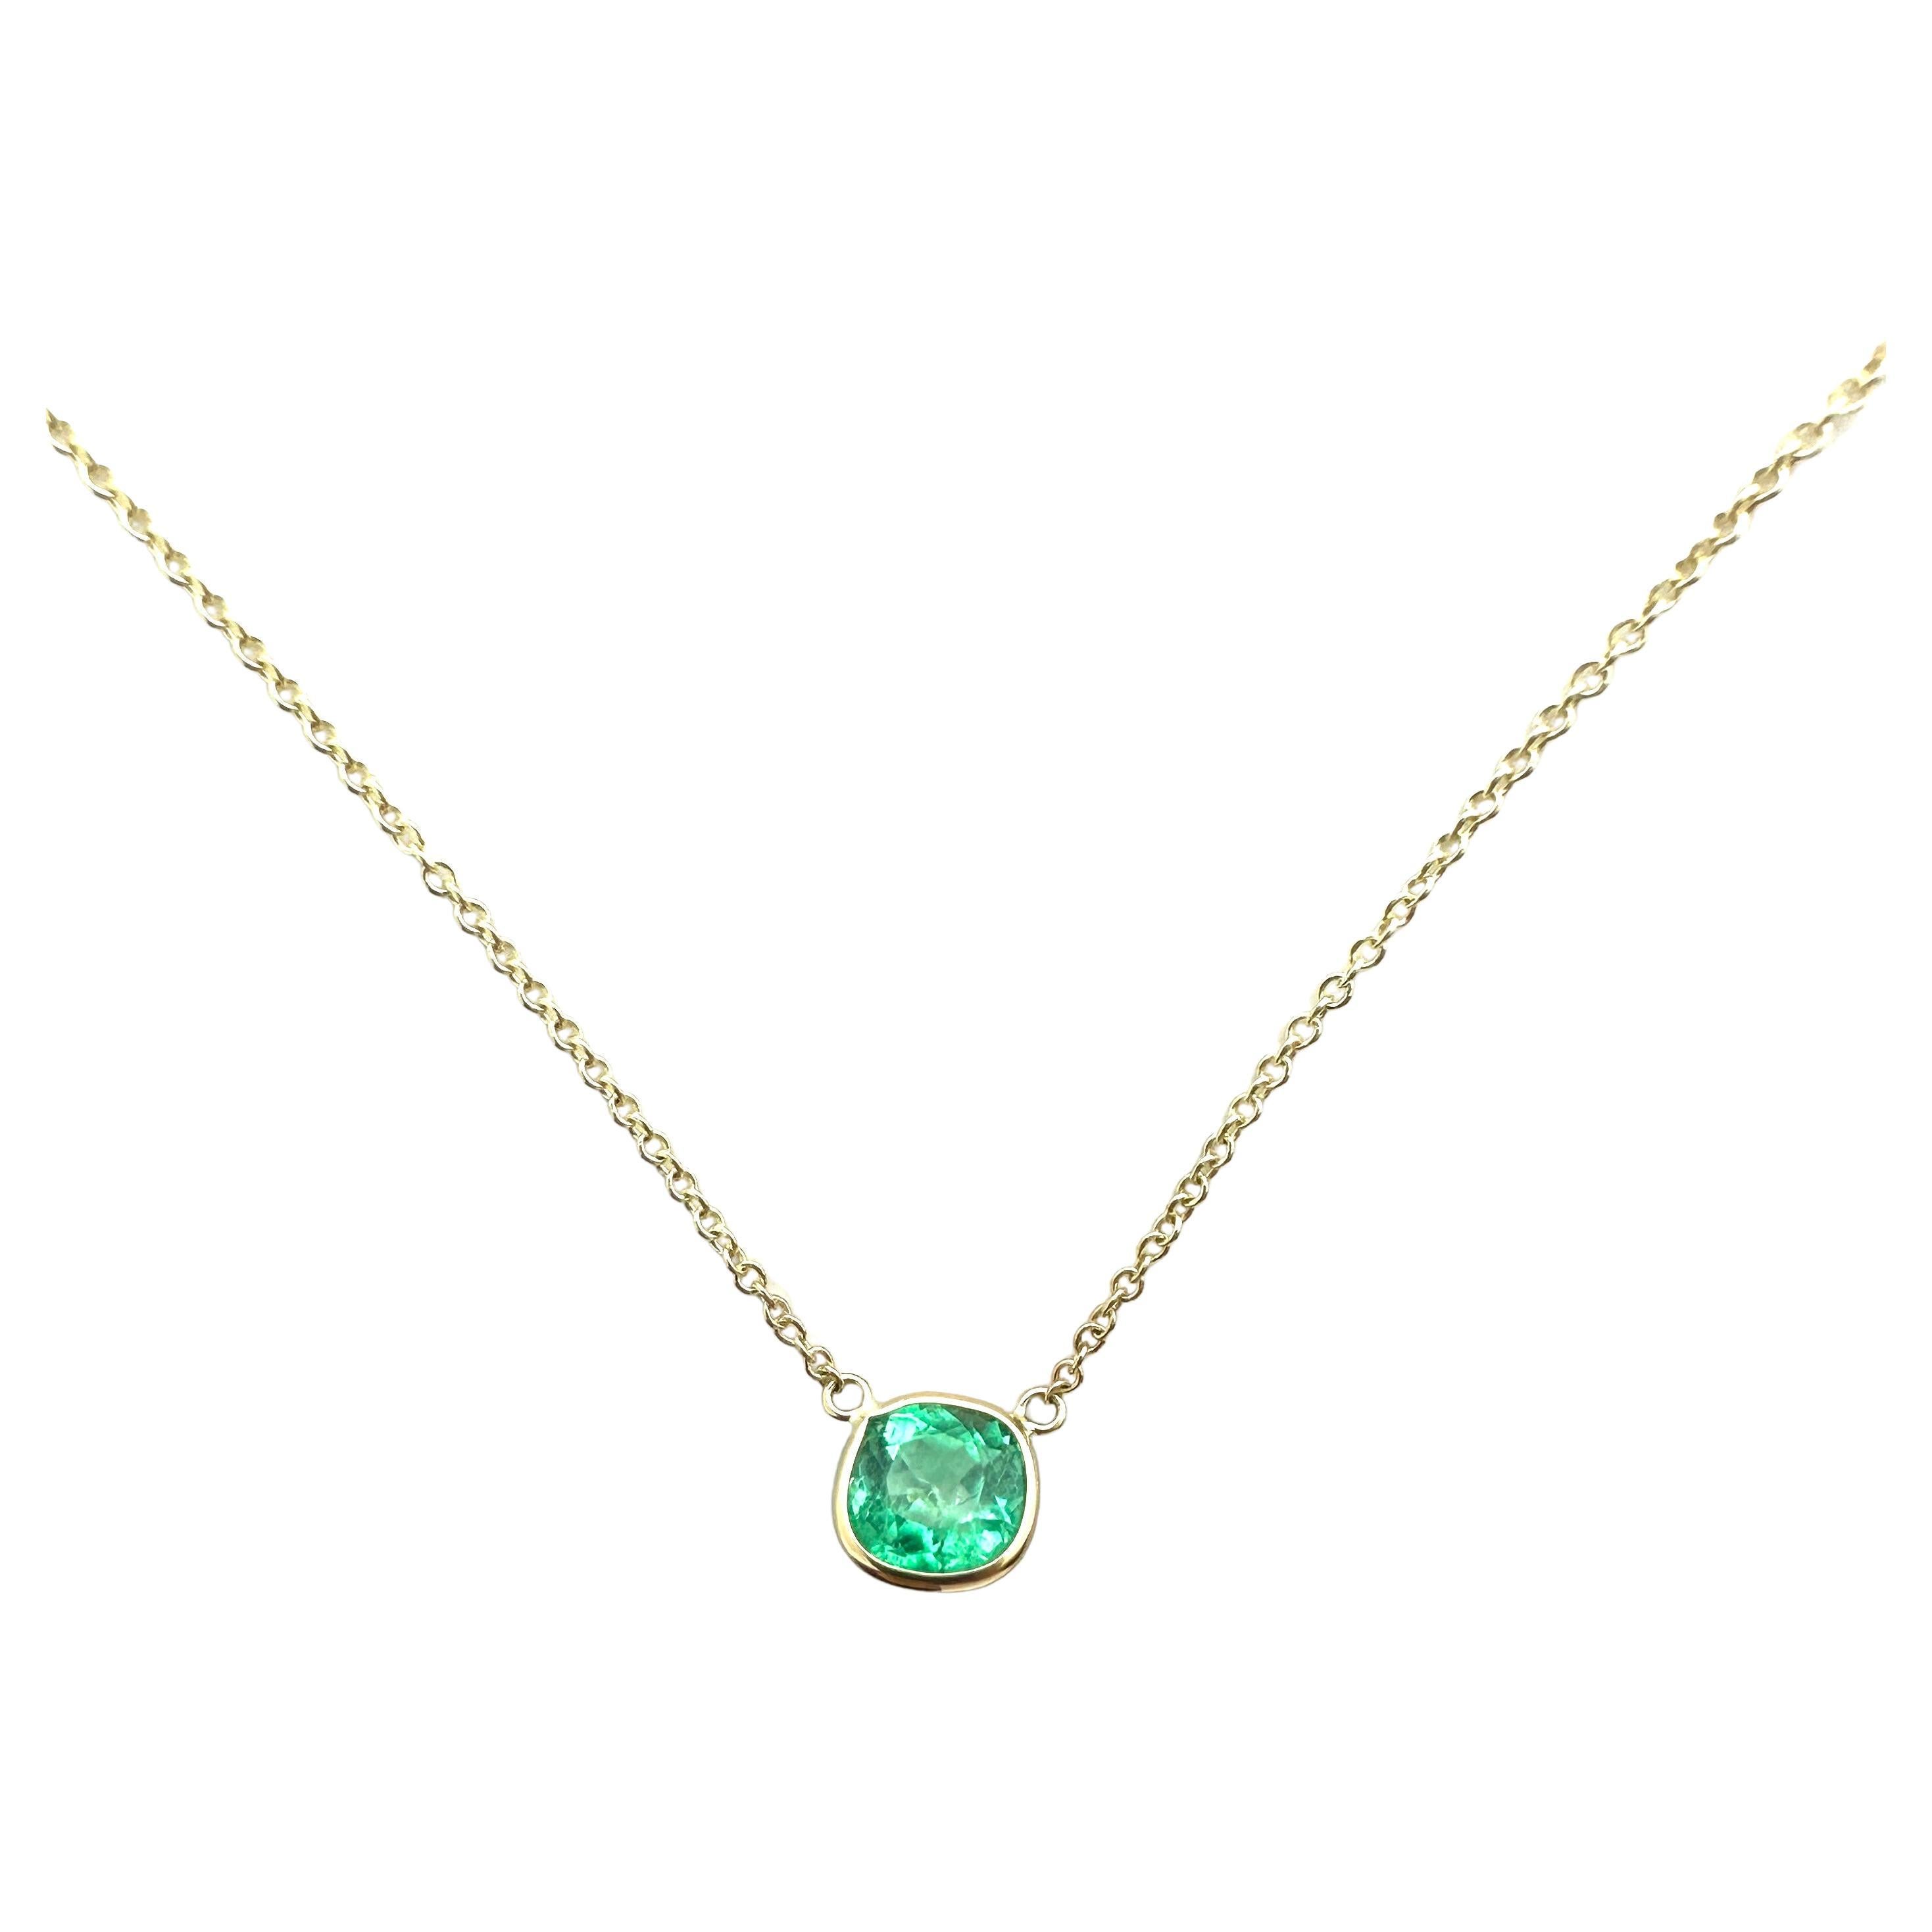 1.51 Carat Emerald Cushion & Fashion Necklaces In 14K Yellow Gold